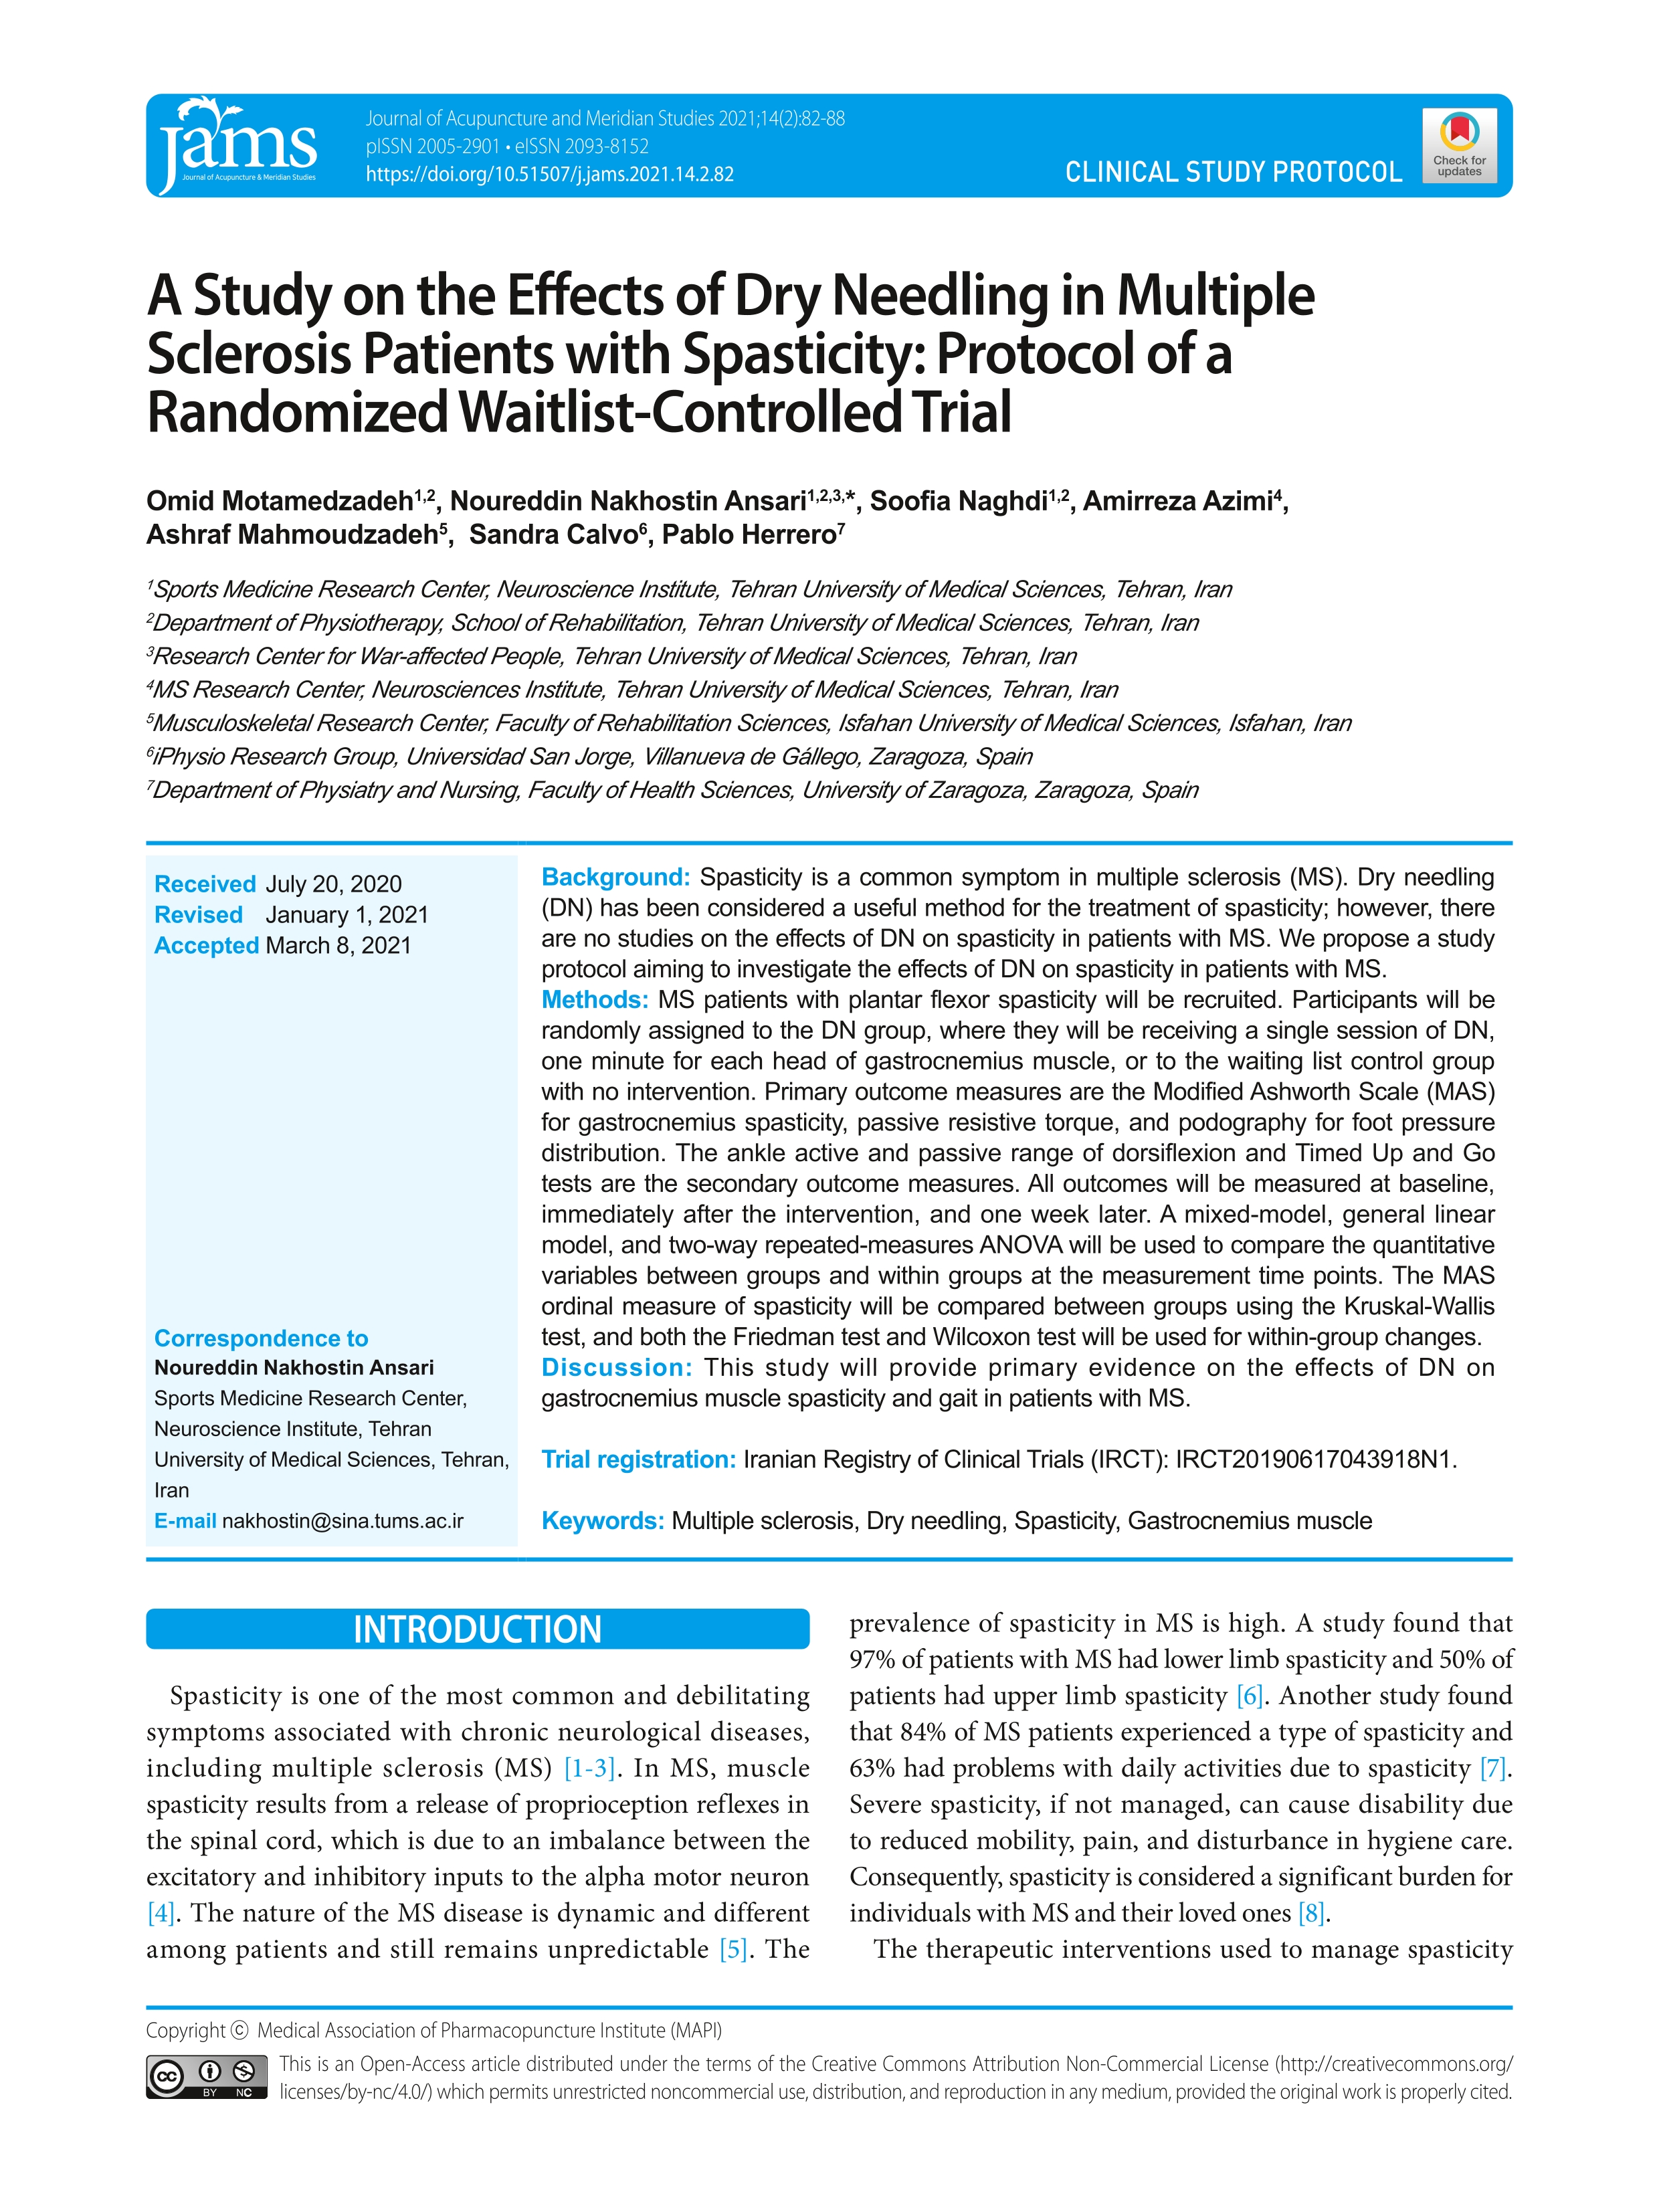 A study on the effects of dry needling in multiple sclerosis patients with spasticity: Protocol of a randomized waitlist-controlled trial